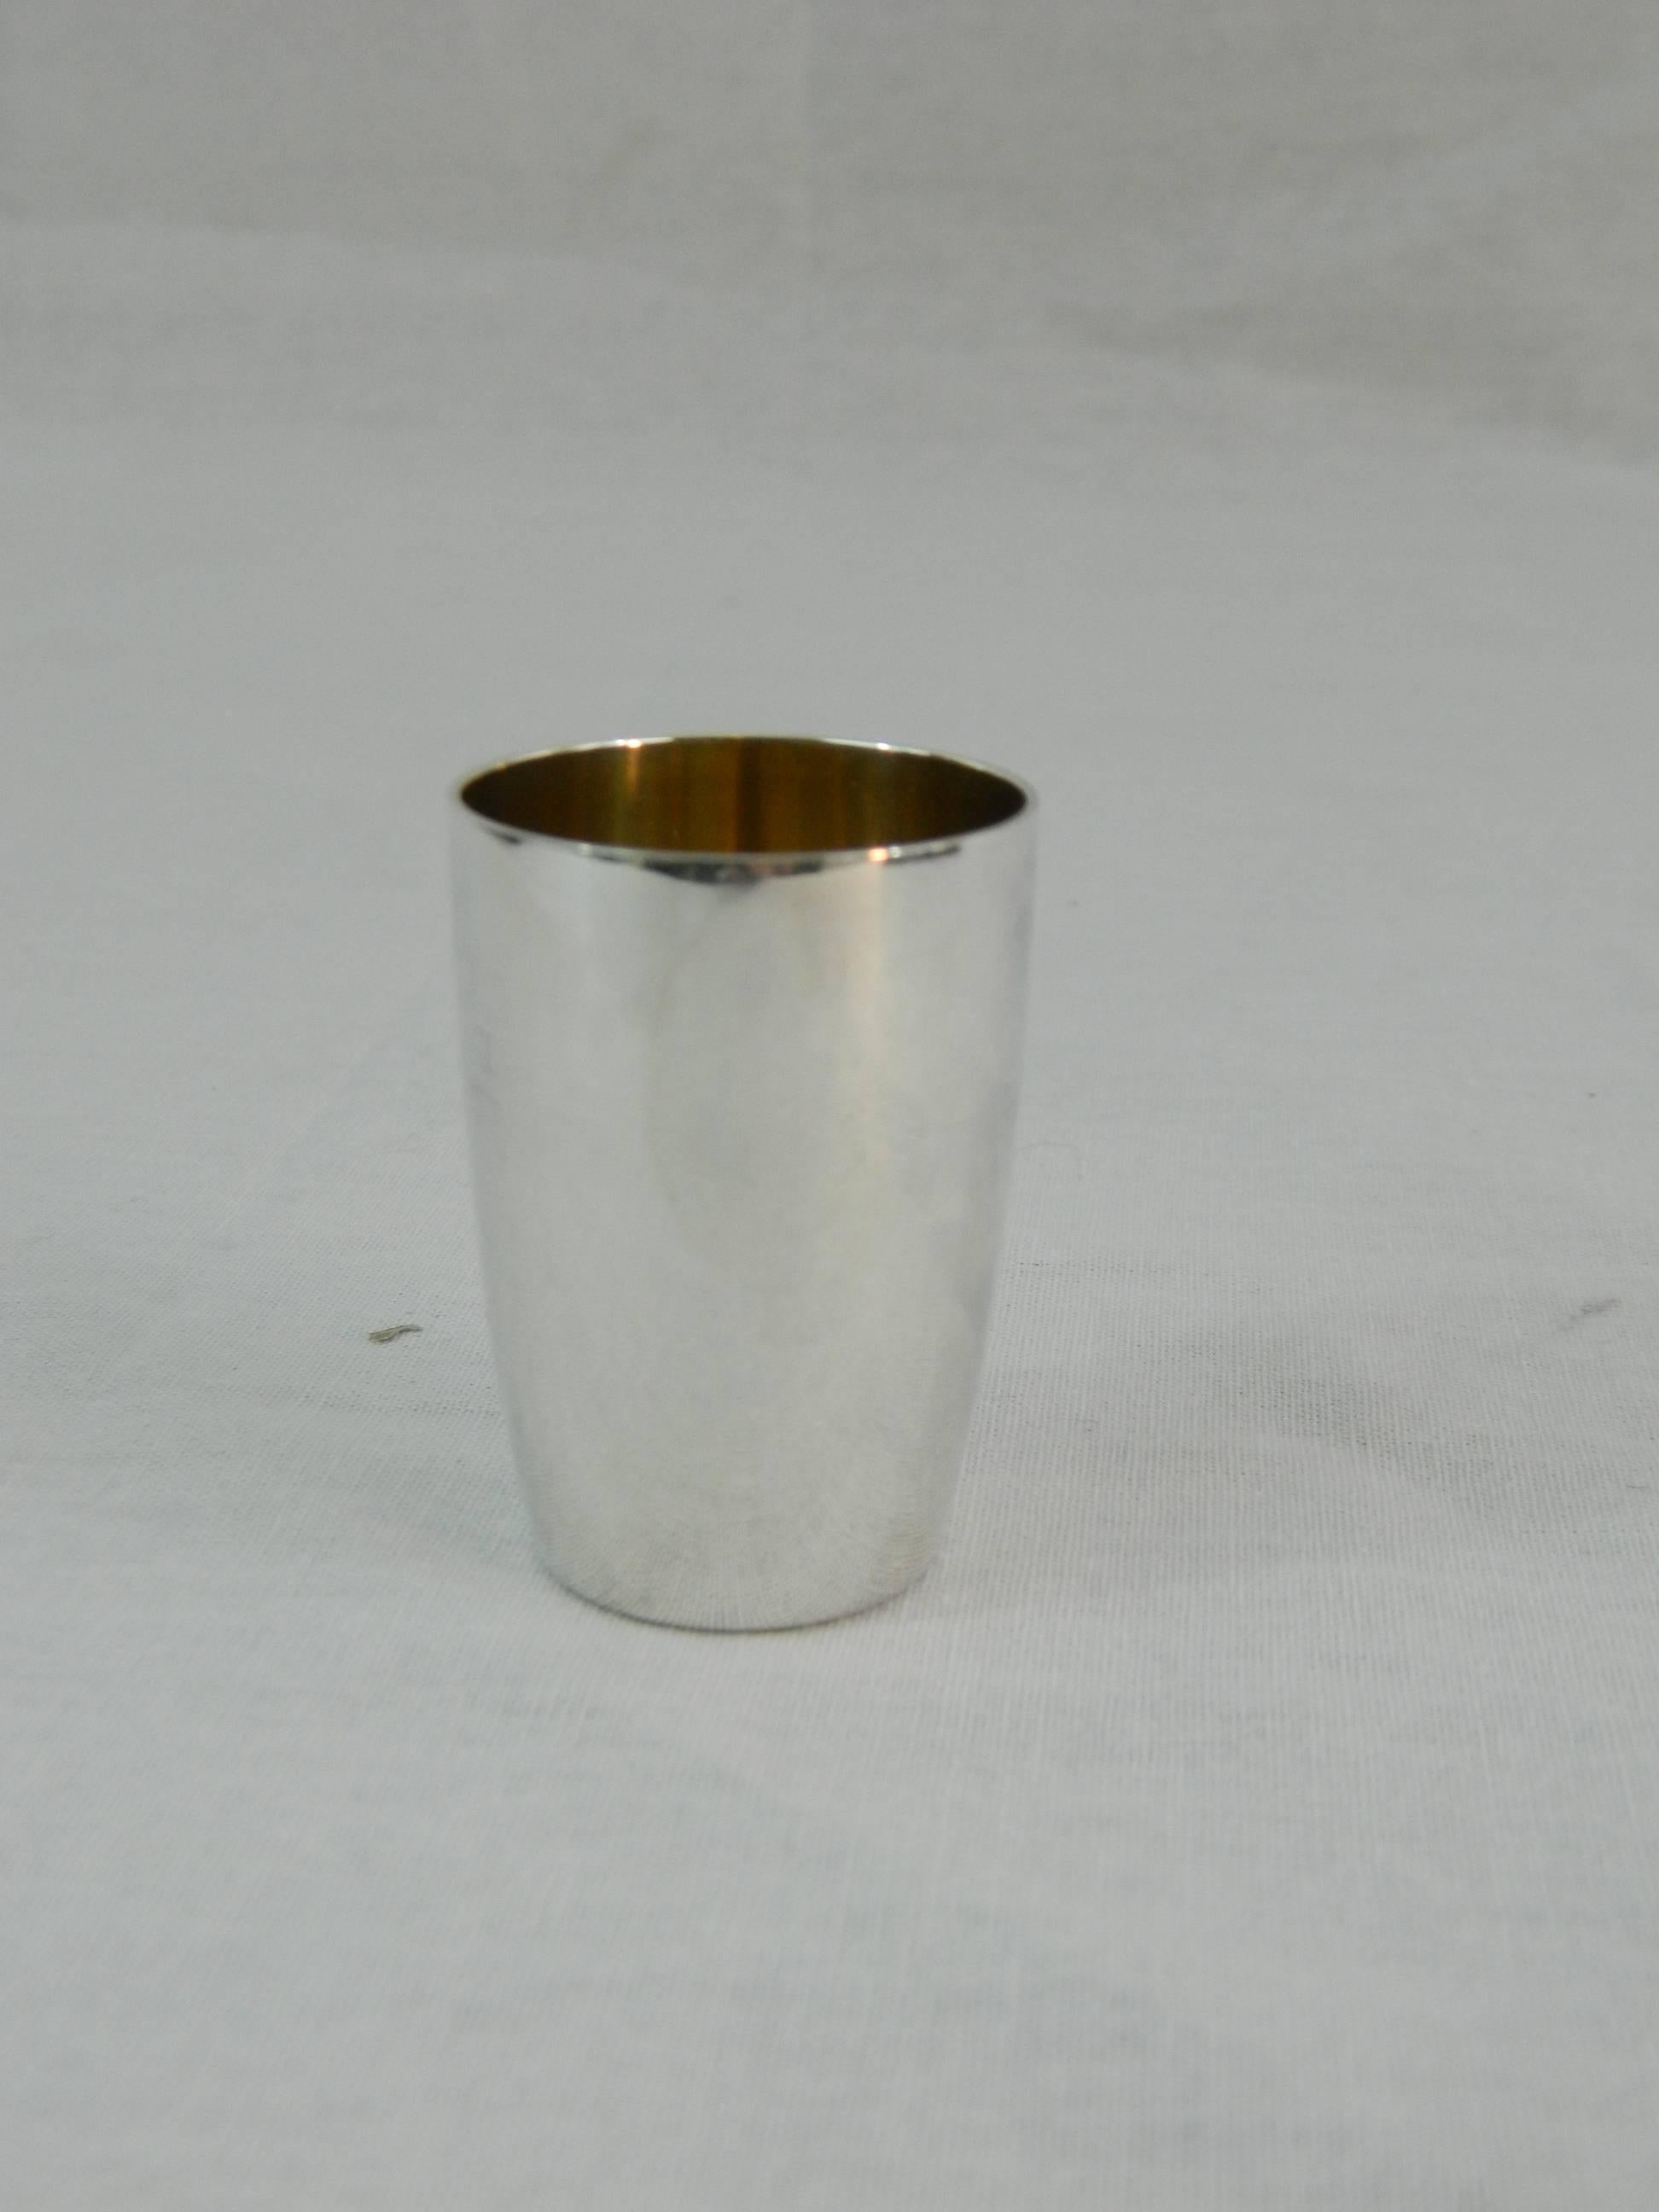 Set of four Tiffany & Co. sterling silver shot glasses, early 20th century. Gold interior.